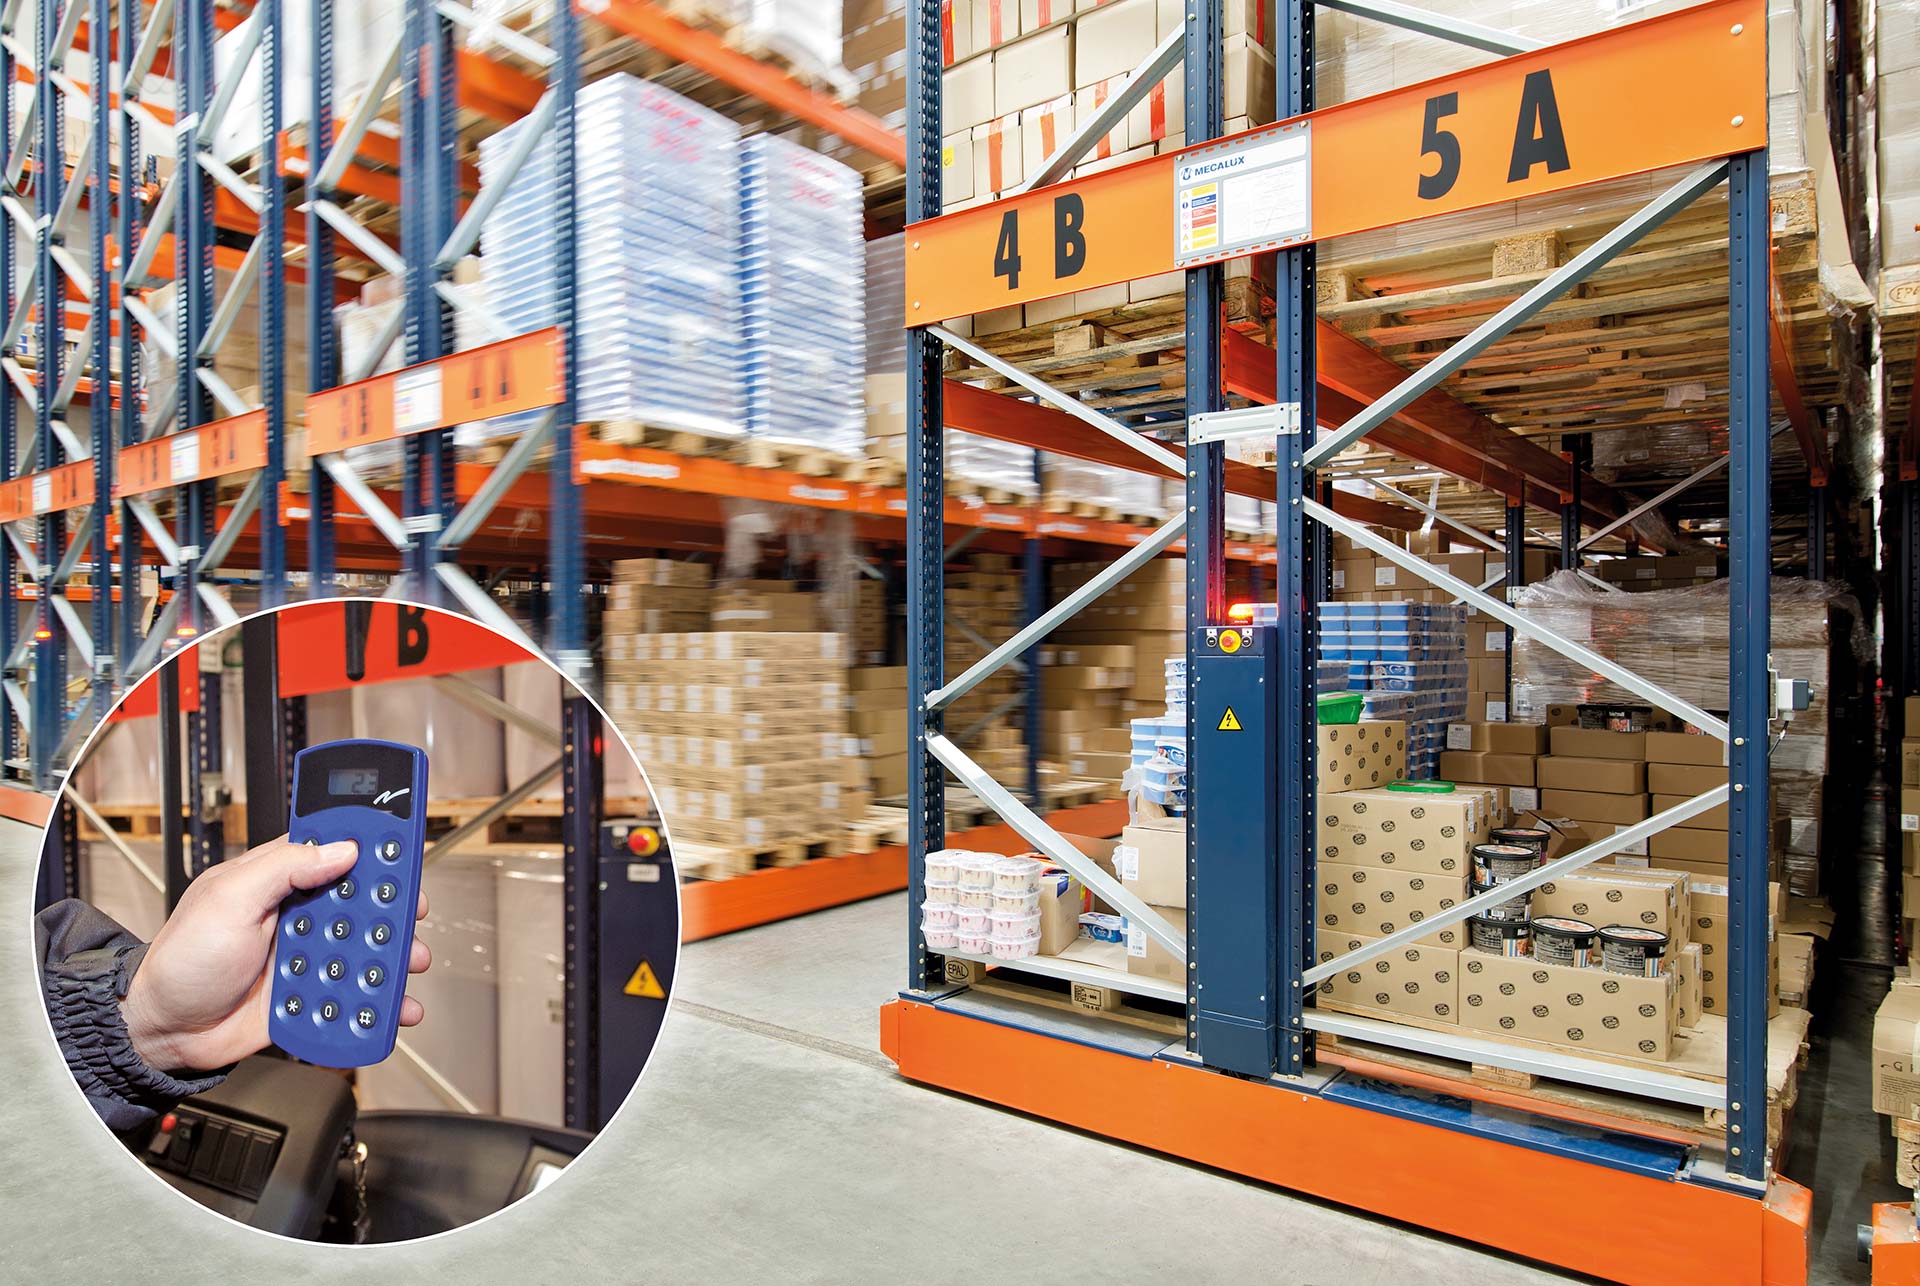 The remote control enables operators to control the Movirack racking from their forklifts